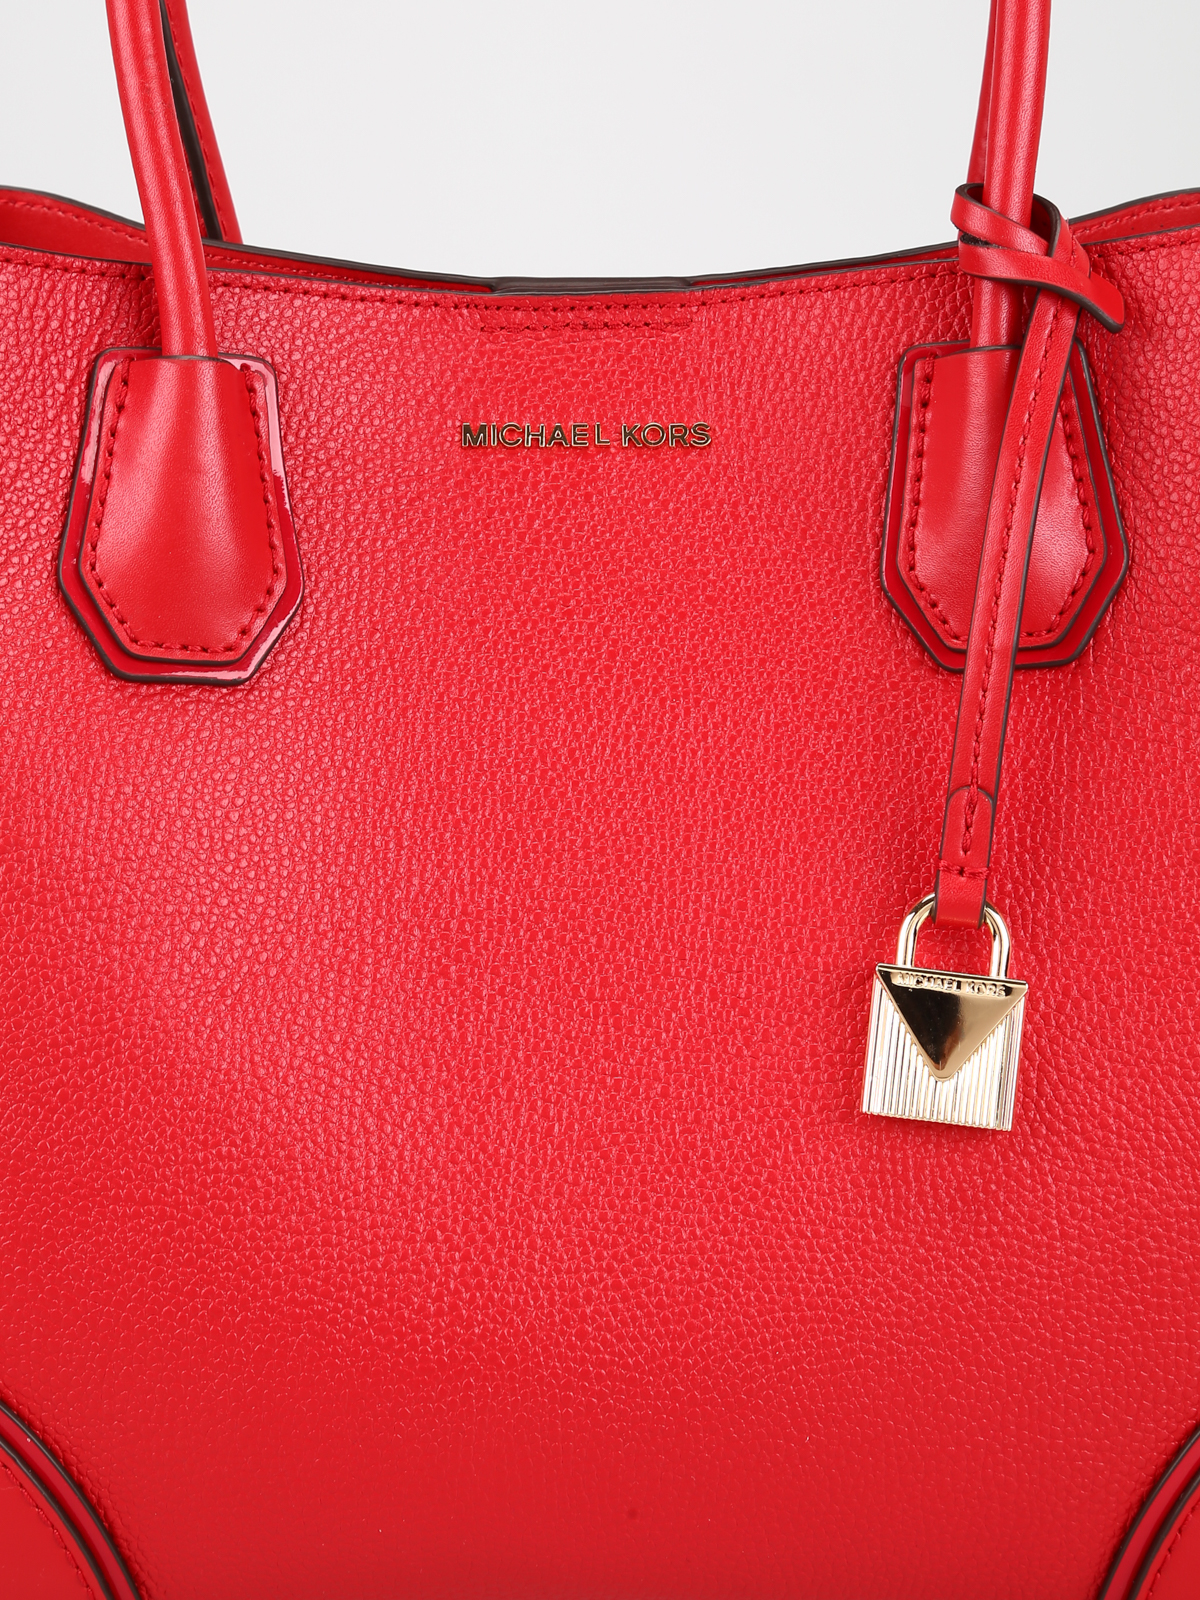 Mercer Gallery bright red leather tote 